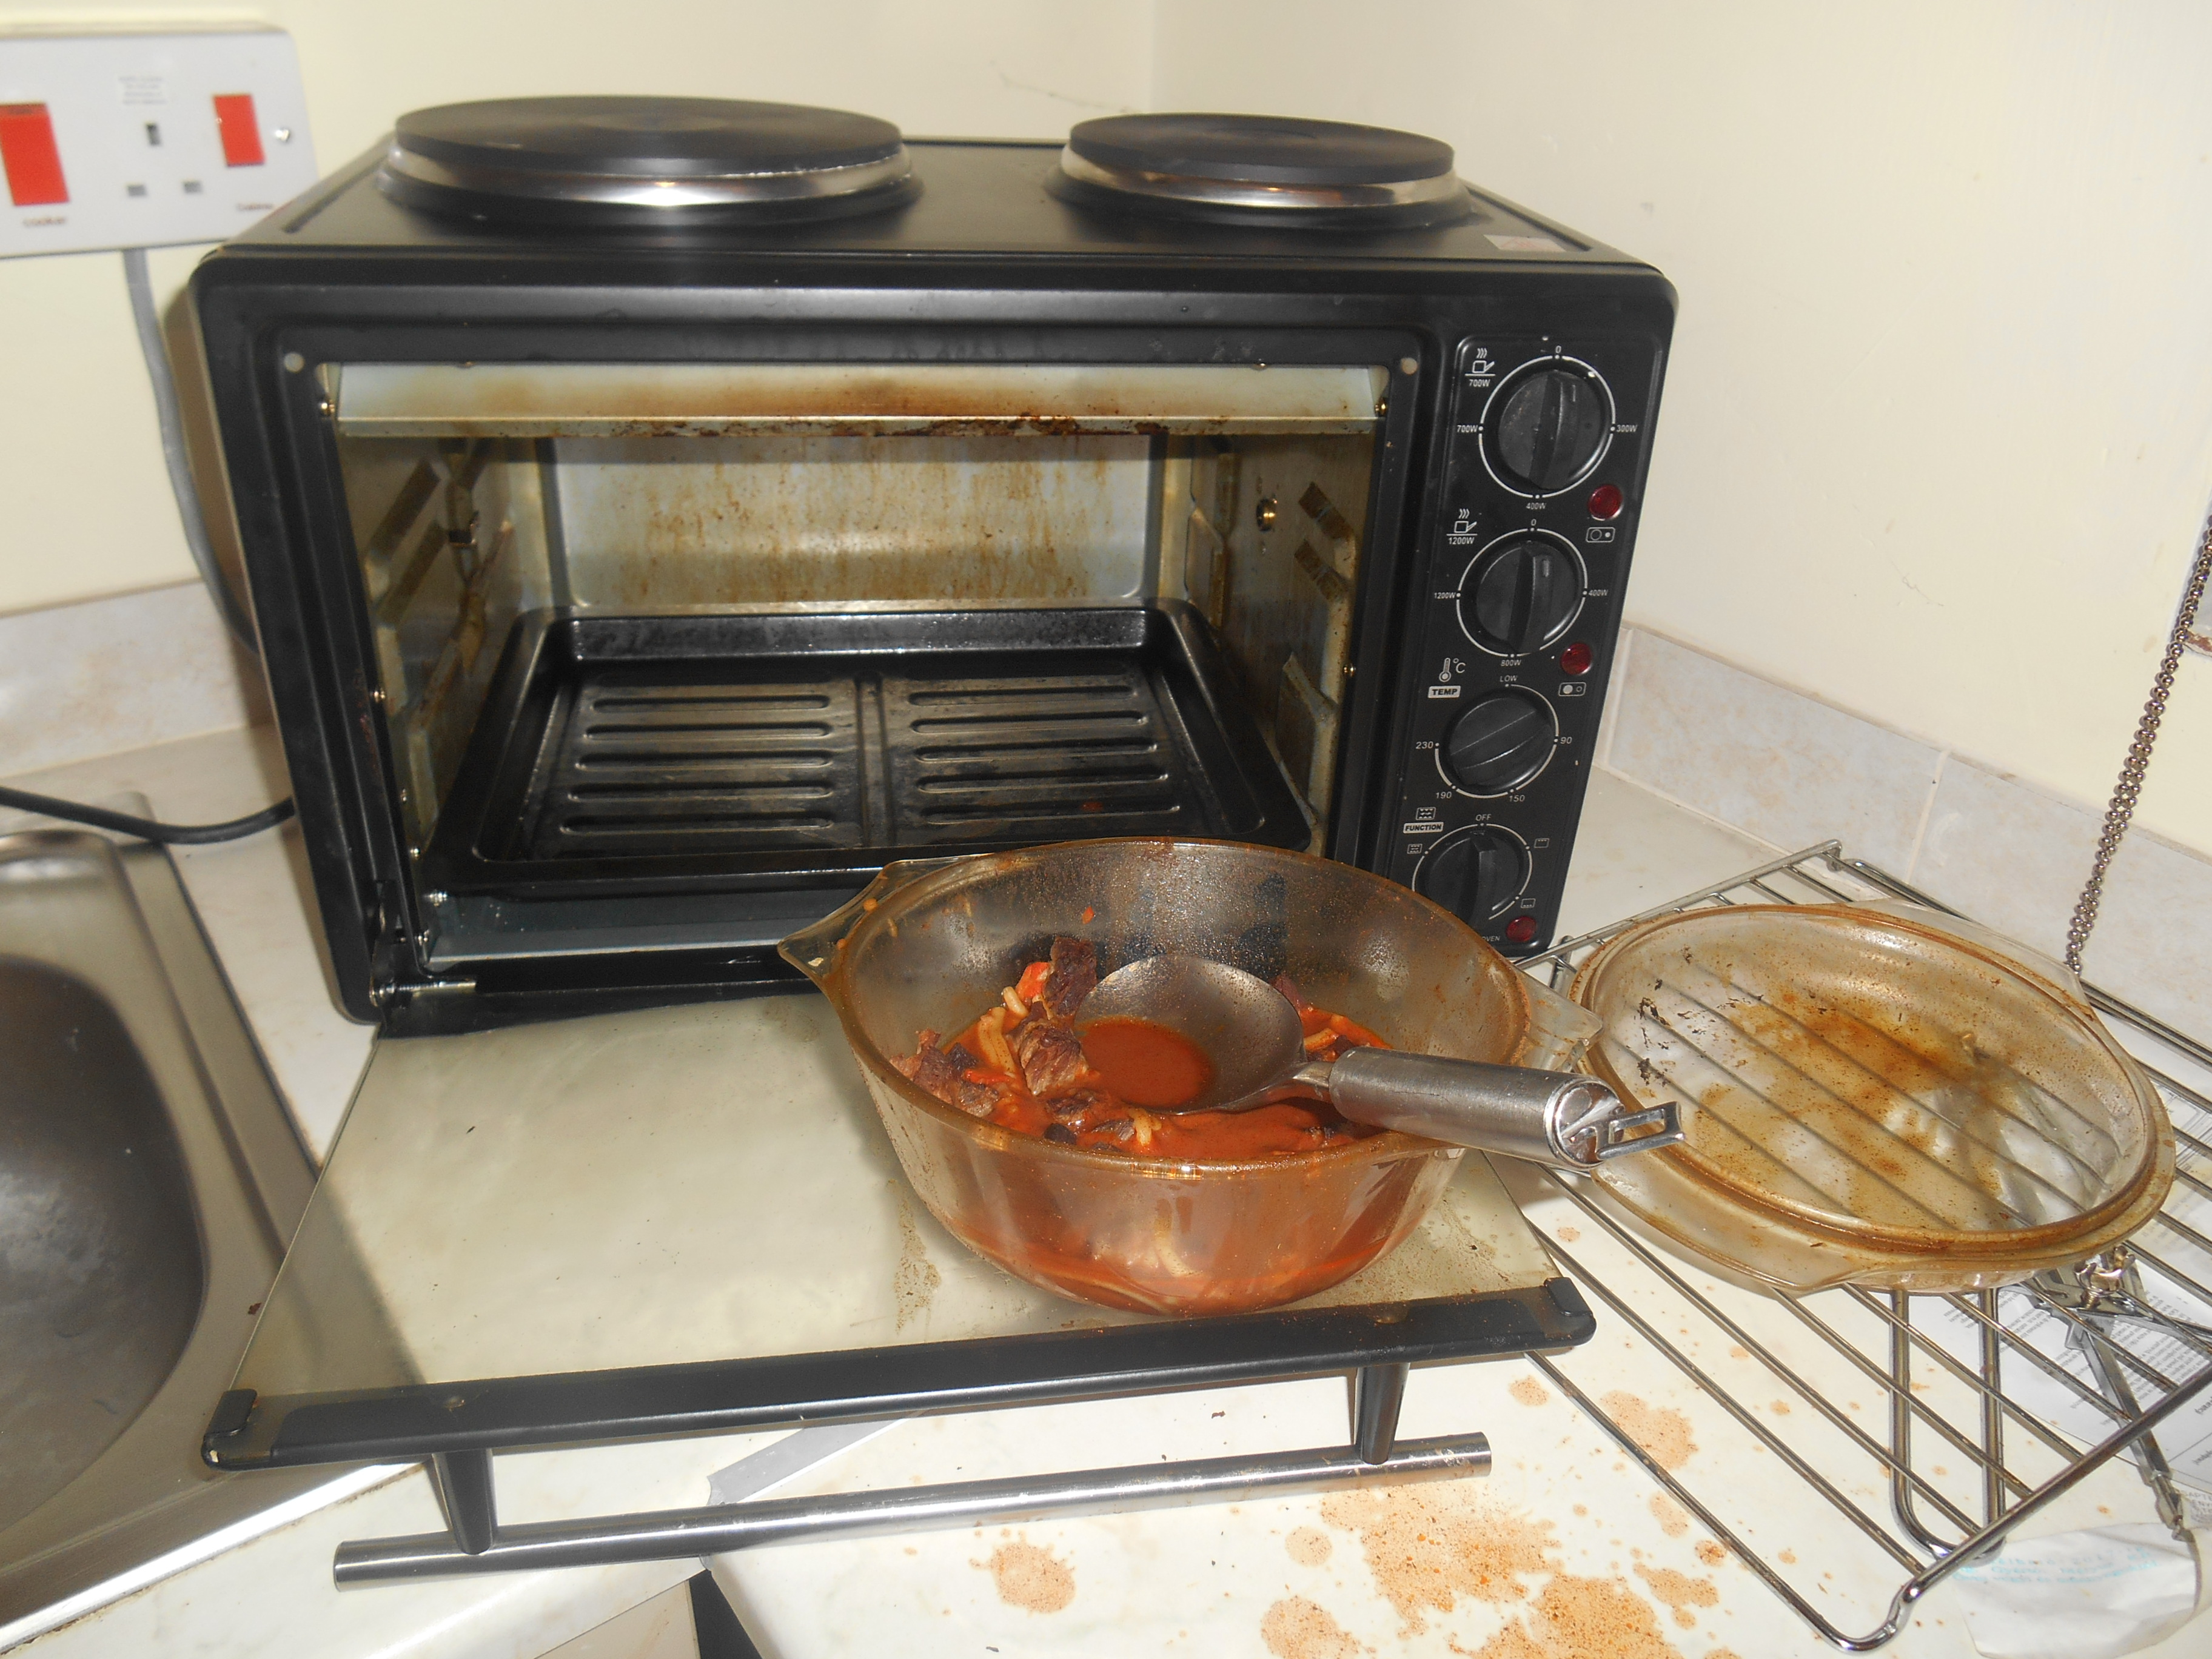 Microwave oven - Wikipedia